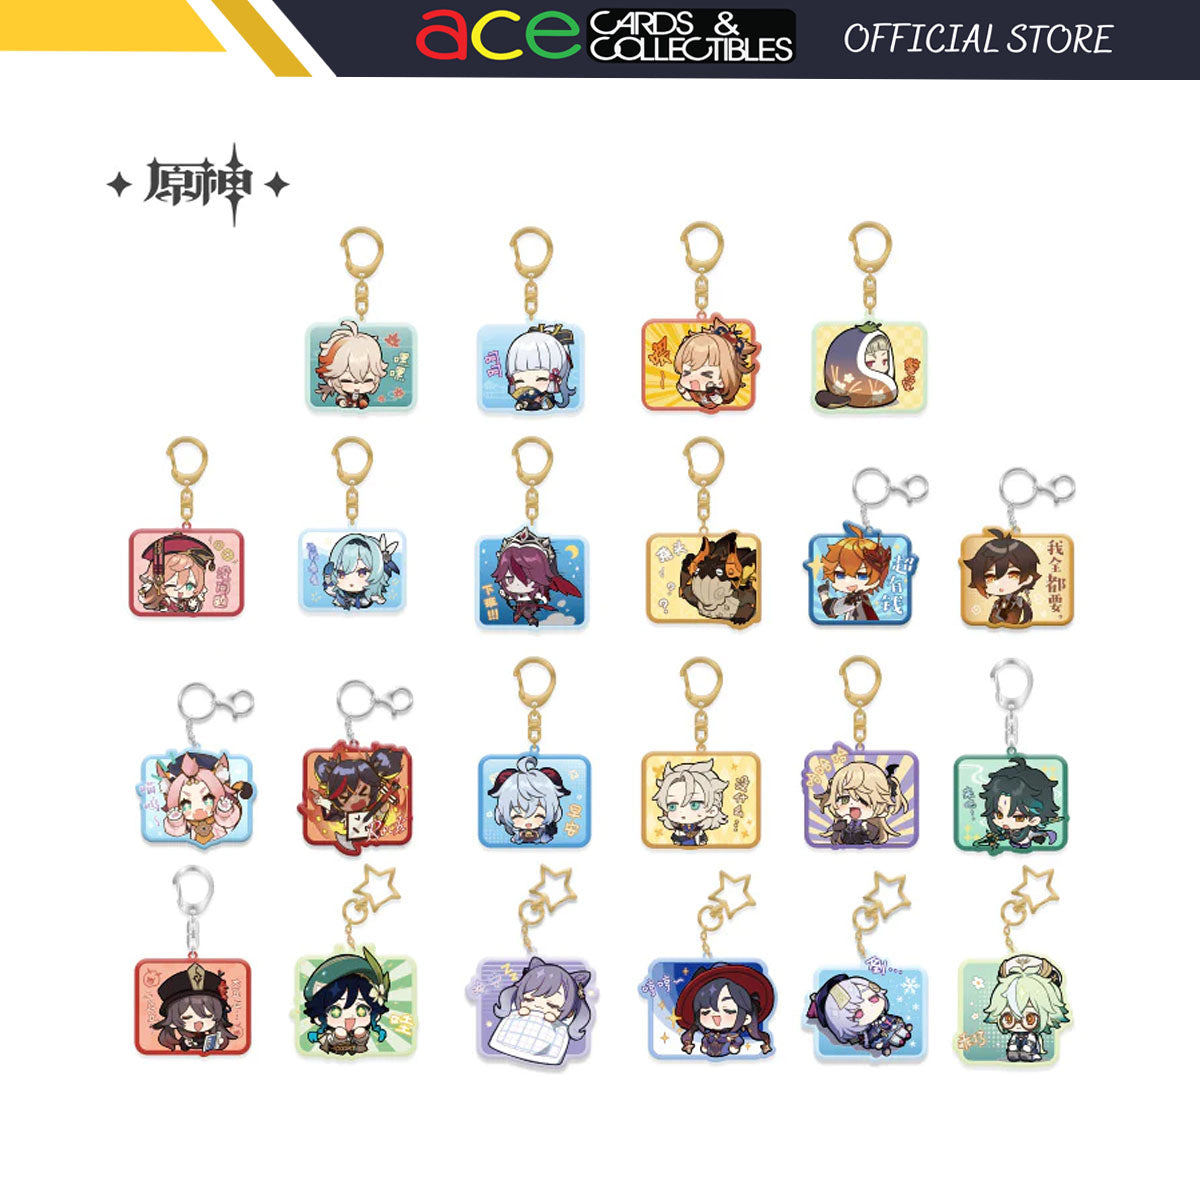 miHoYo Genshin Impact Chibi Stickers Acrylic Keychain Series Vol.1-Eula-miHoYo-Ace Cards &amp; Collectibles